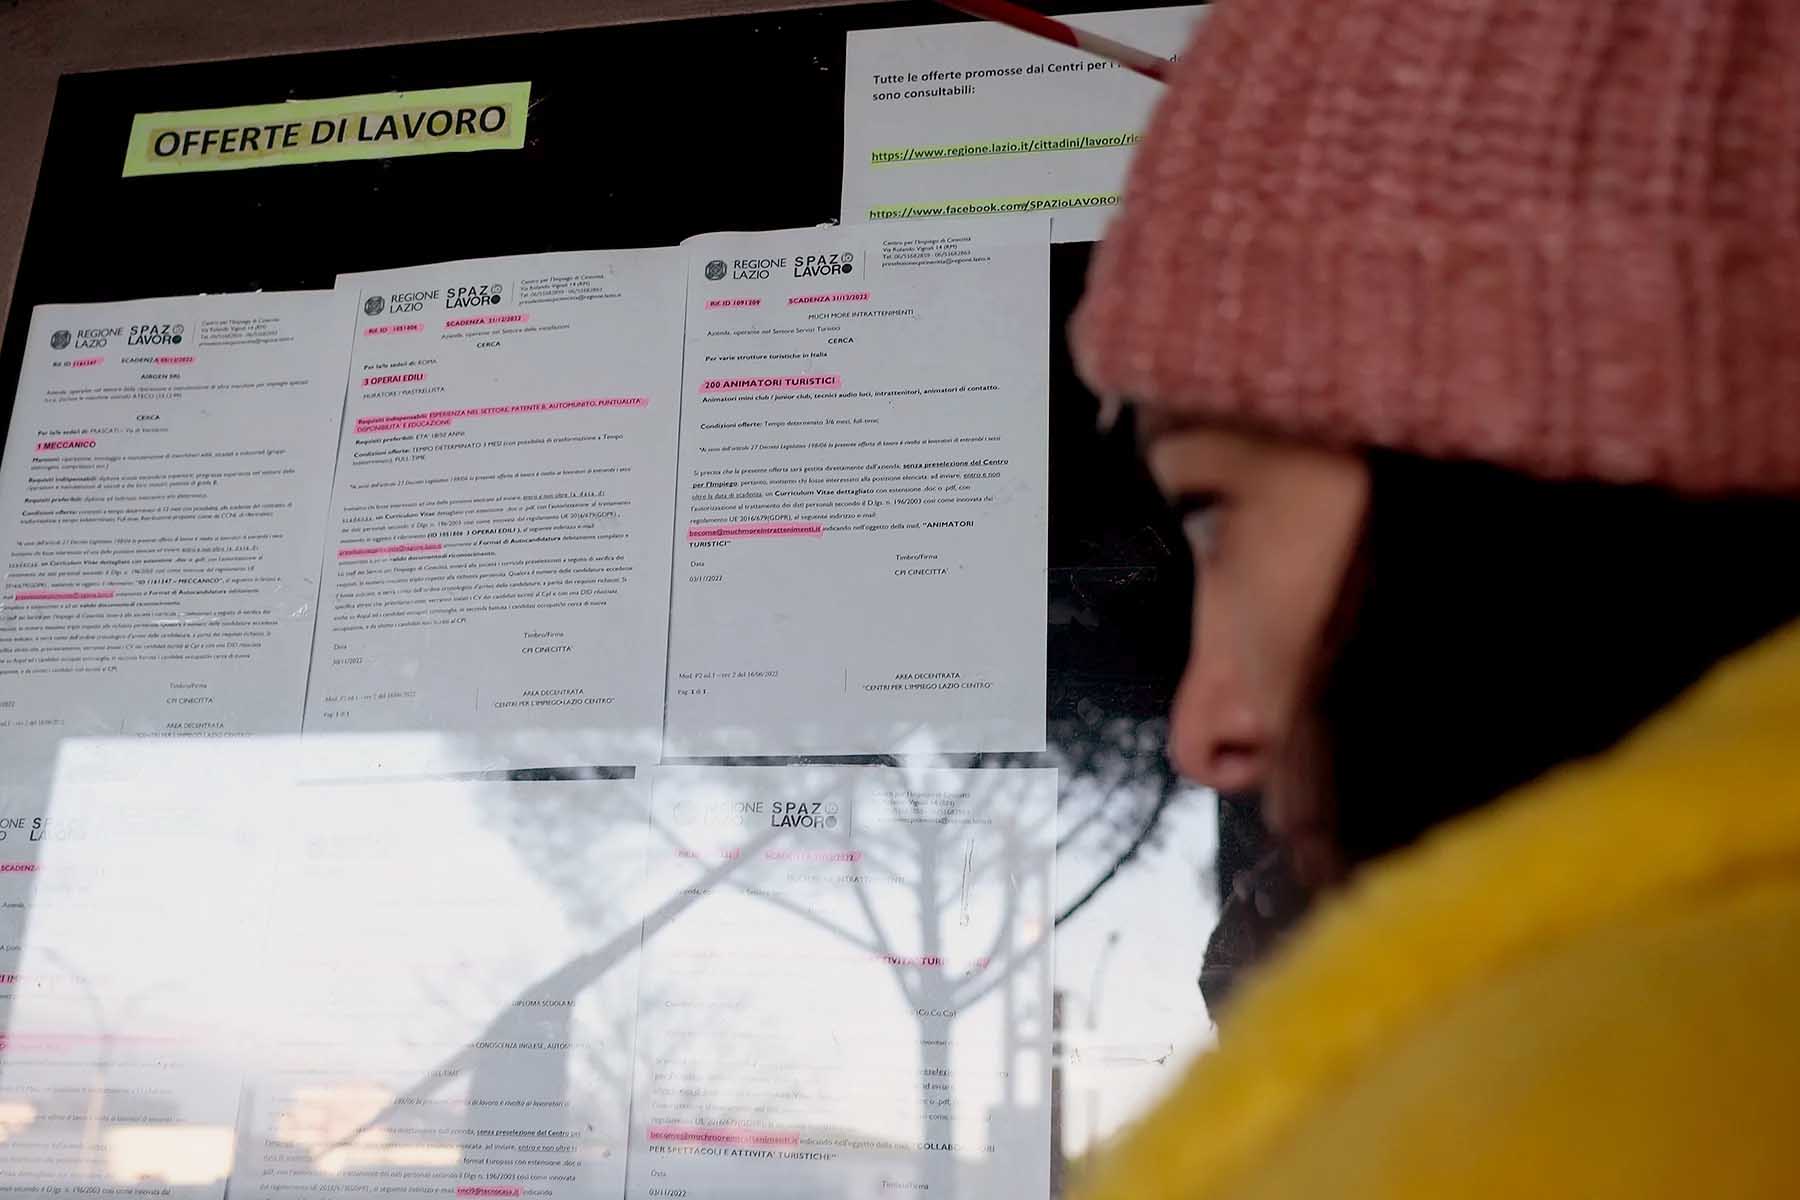 A woman browsing a job board outside a job center in Italy.